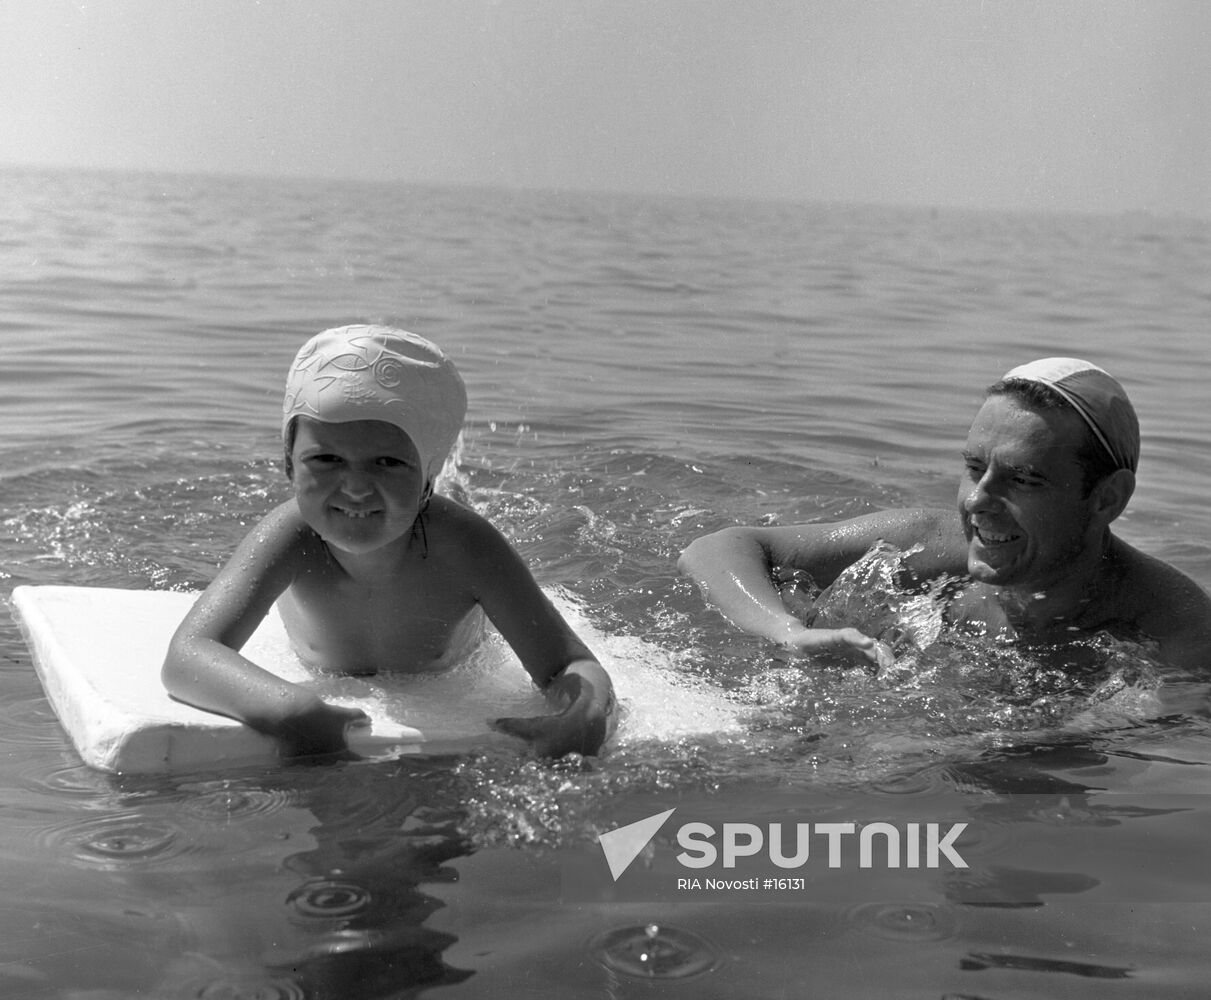 Komarov with his daughter bathing in the sea